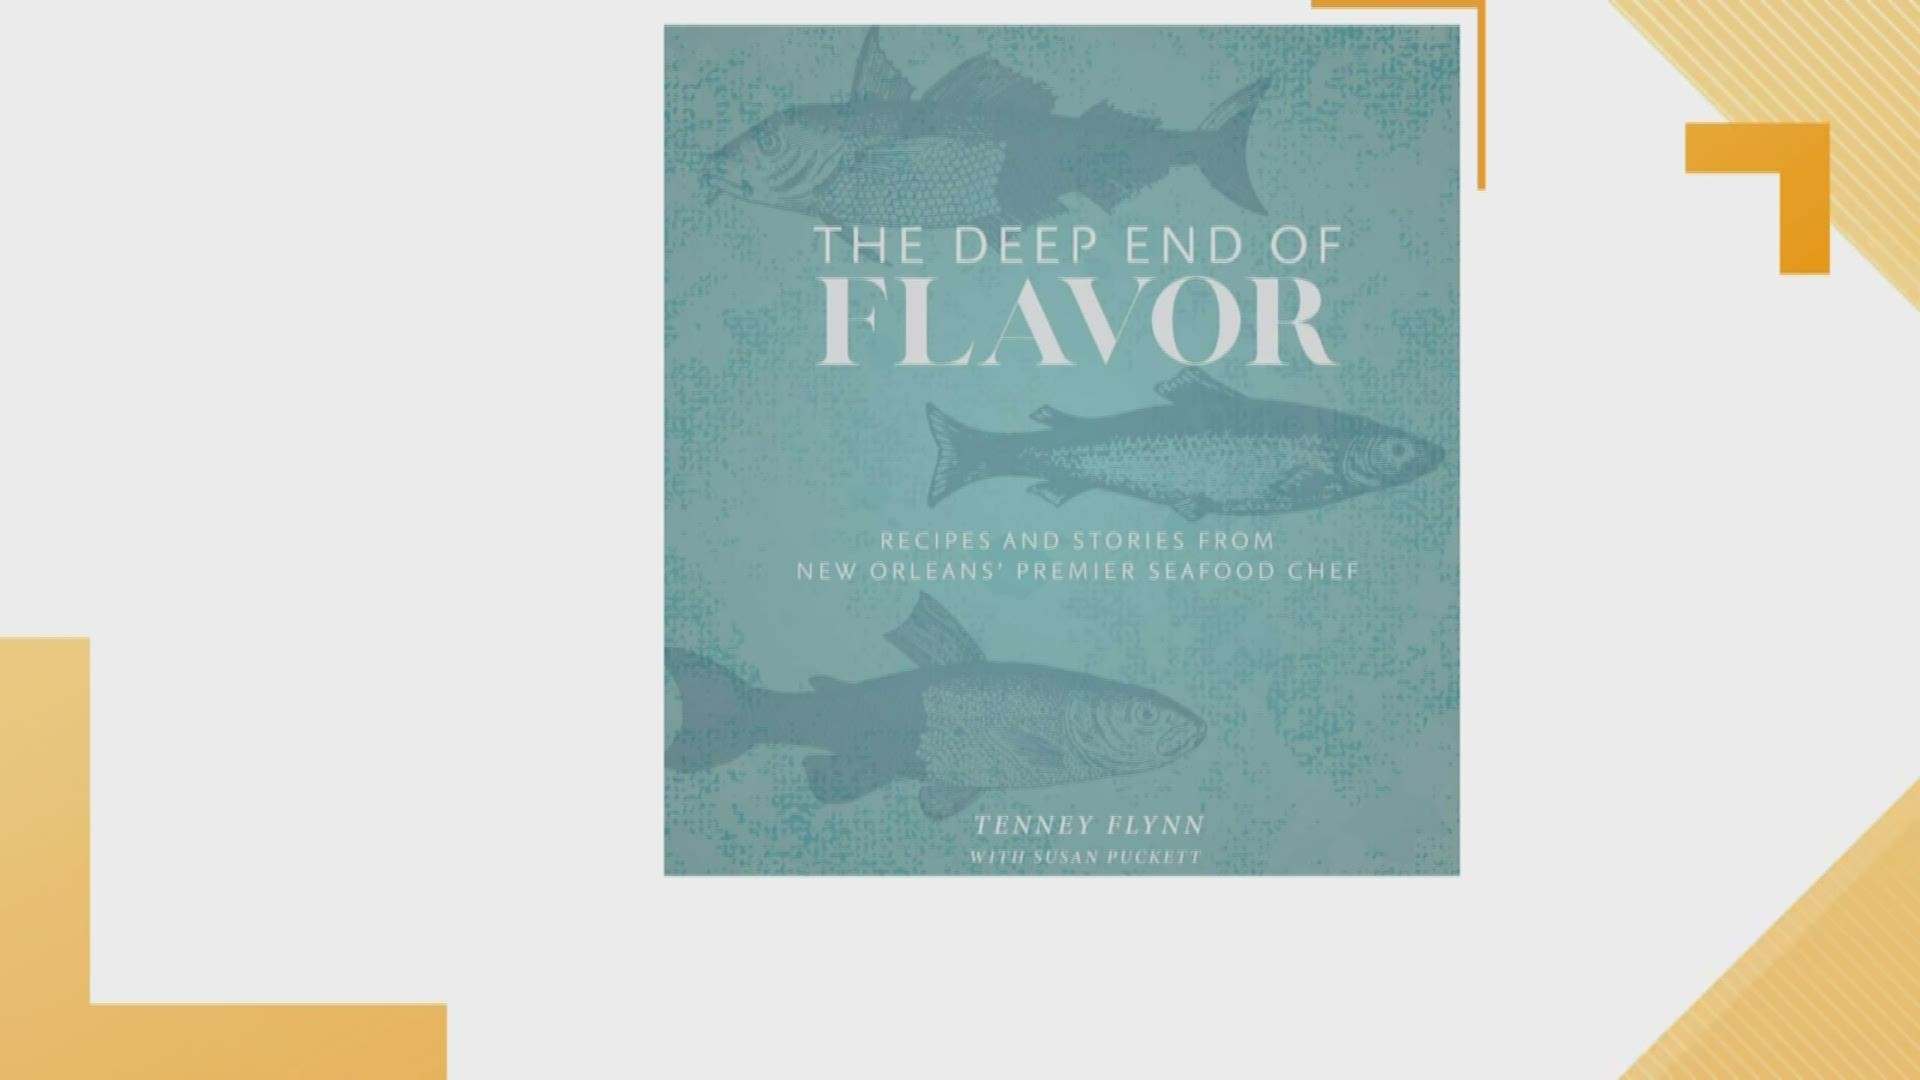 Chef Tenney Flynn from GW Finn Restaurant is in the kitchen bringing some of his recipes from his new cookbook "The Deep End of Flavor" to life.